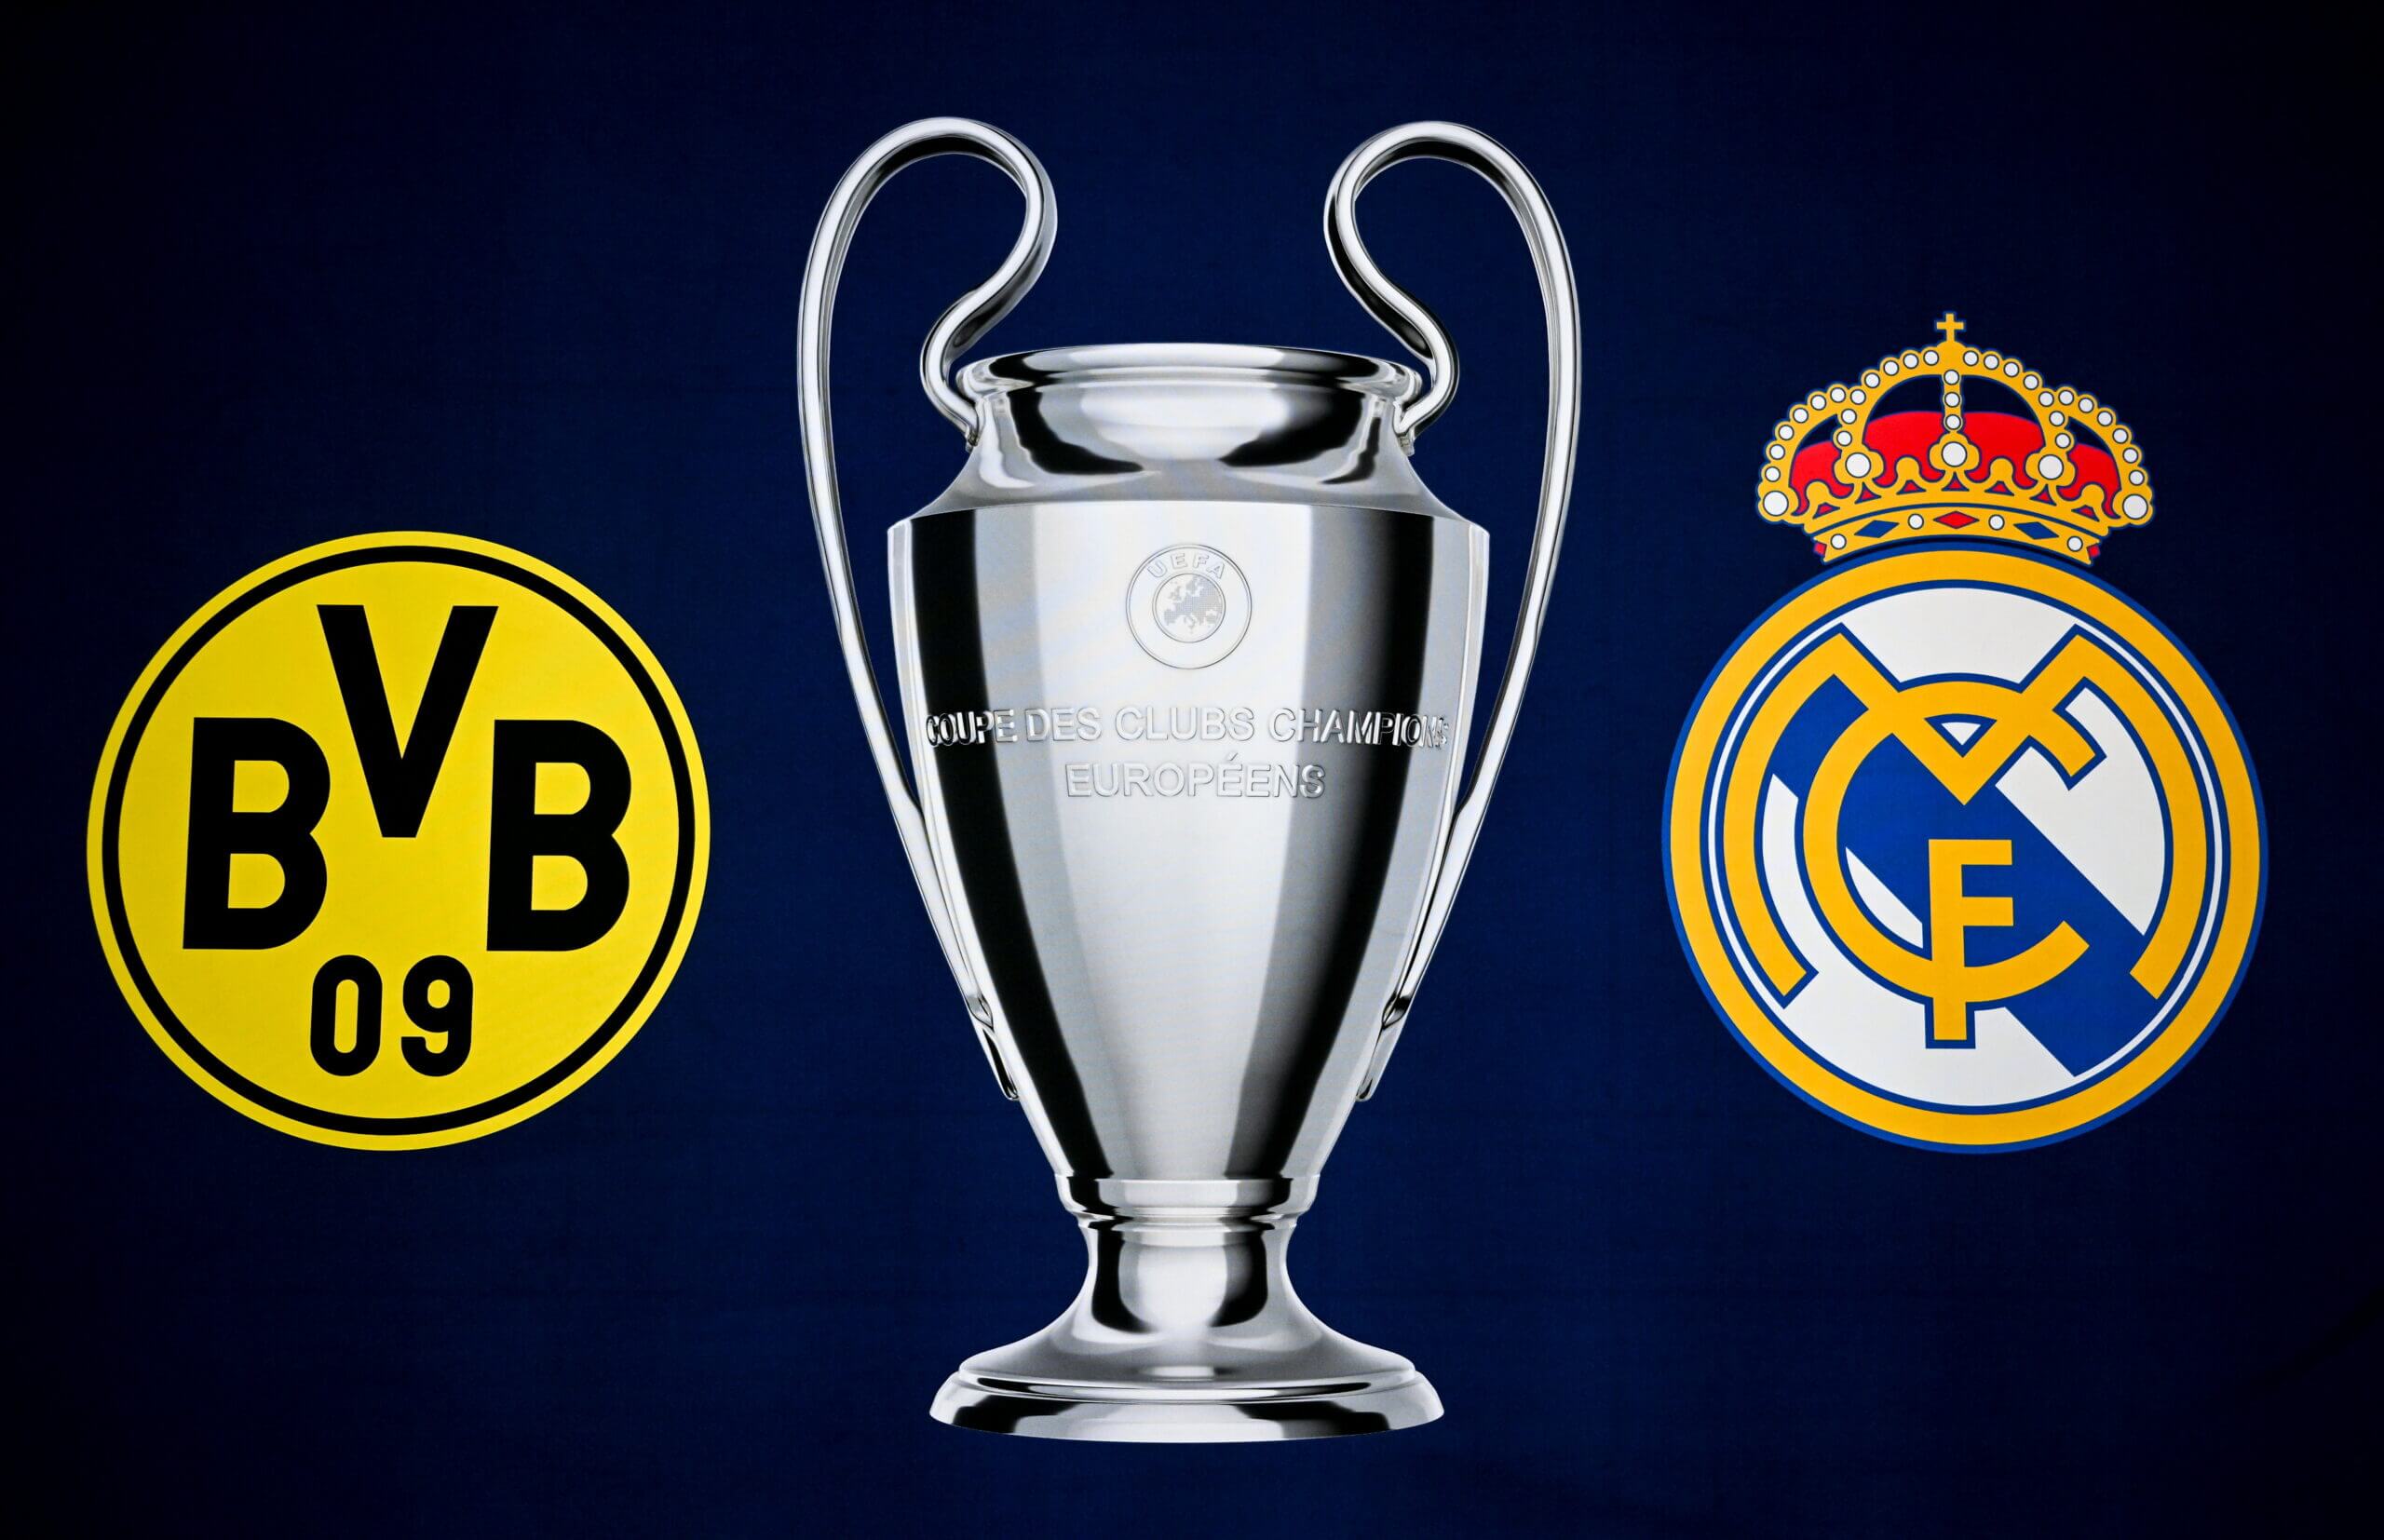 Champions League final: The Athletic’s guide to Borussia Dortmund v Real Madrid